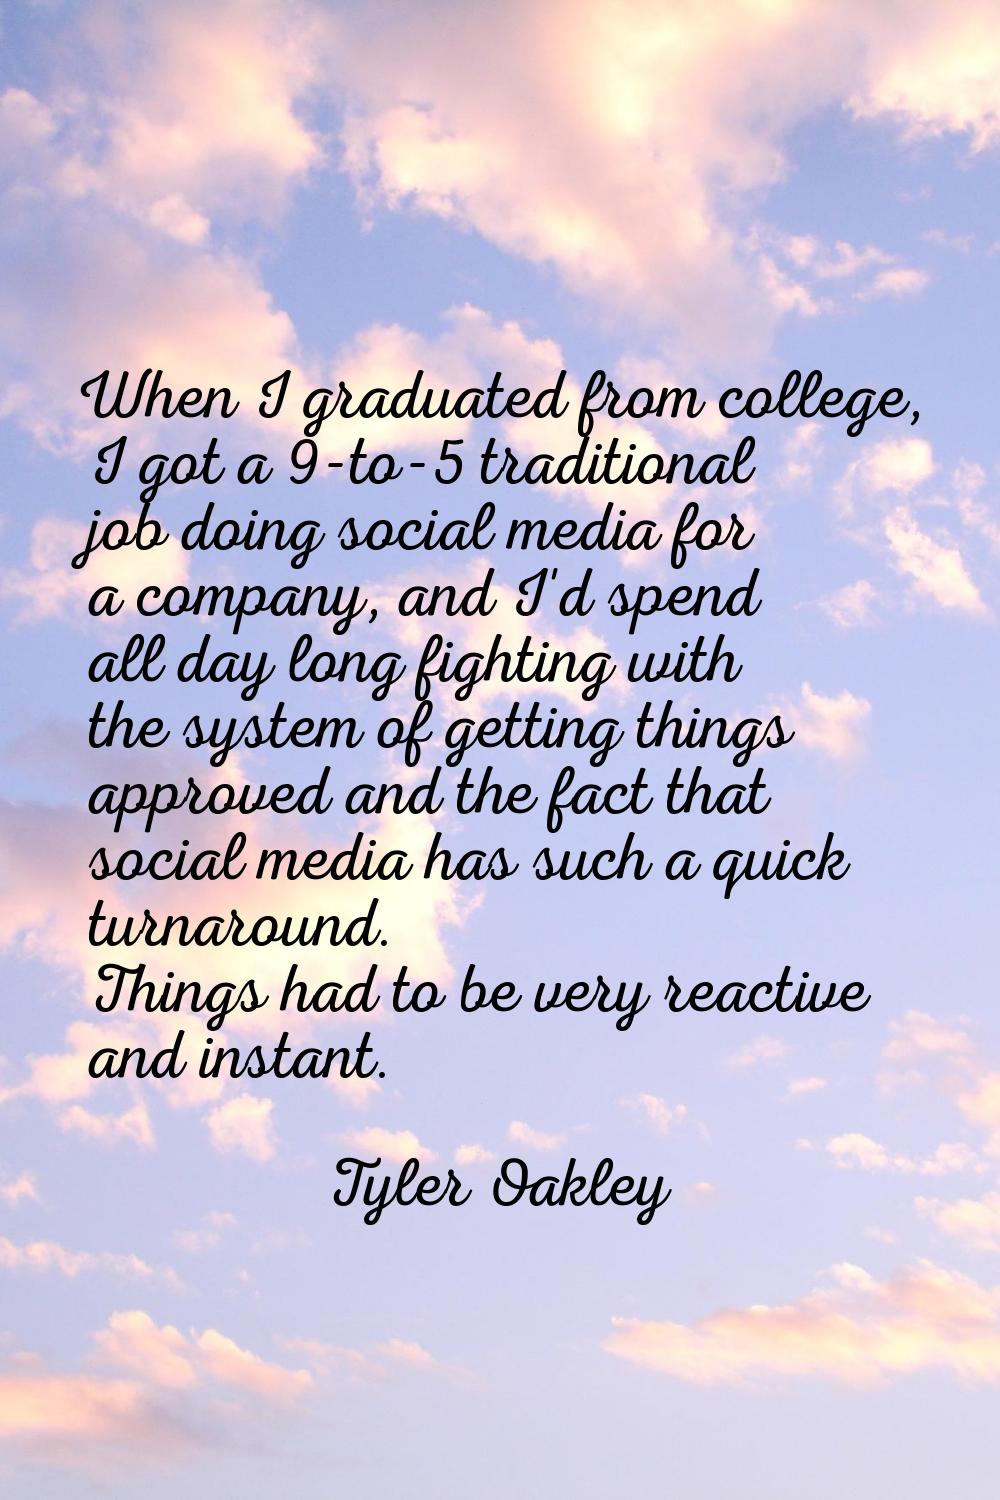 When I graduated from college, I got a 9-to-5 traditional job doing social media for a company, and